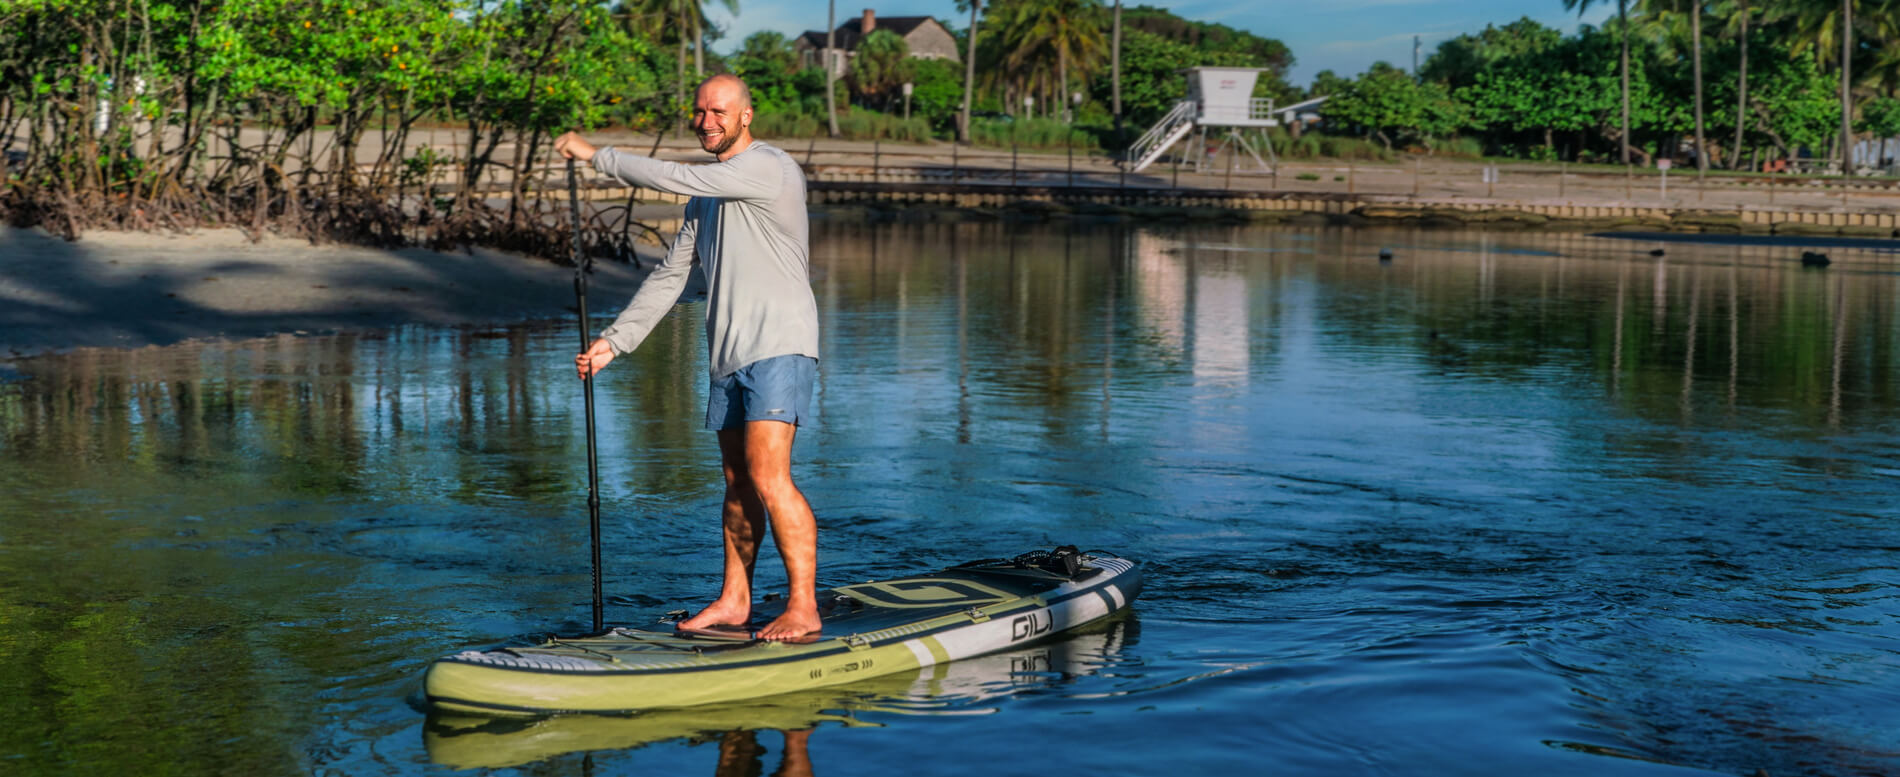 How To Paddle Board For Beginners 